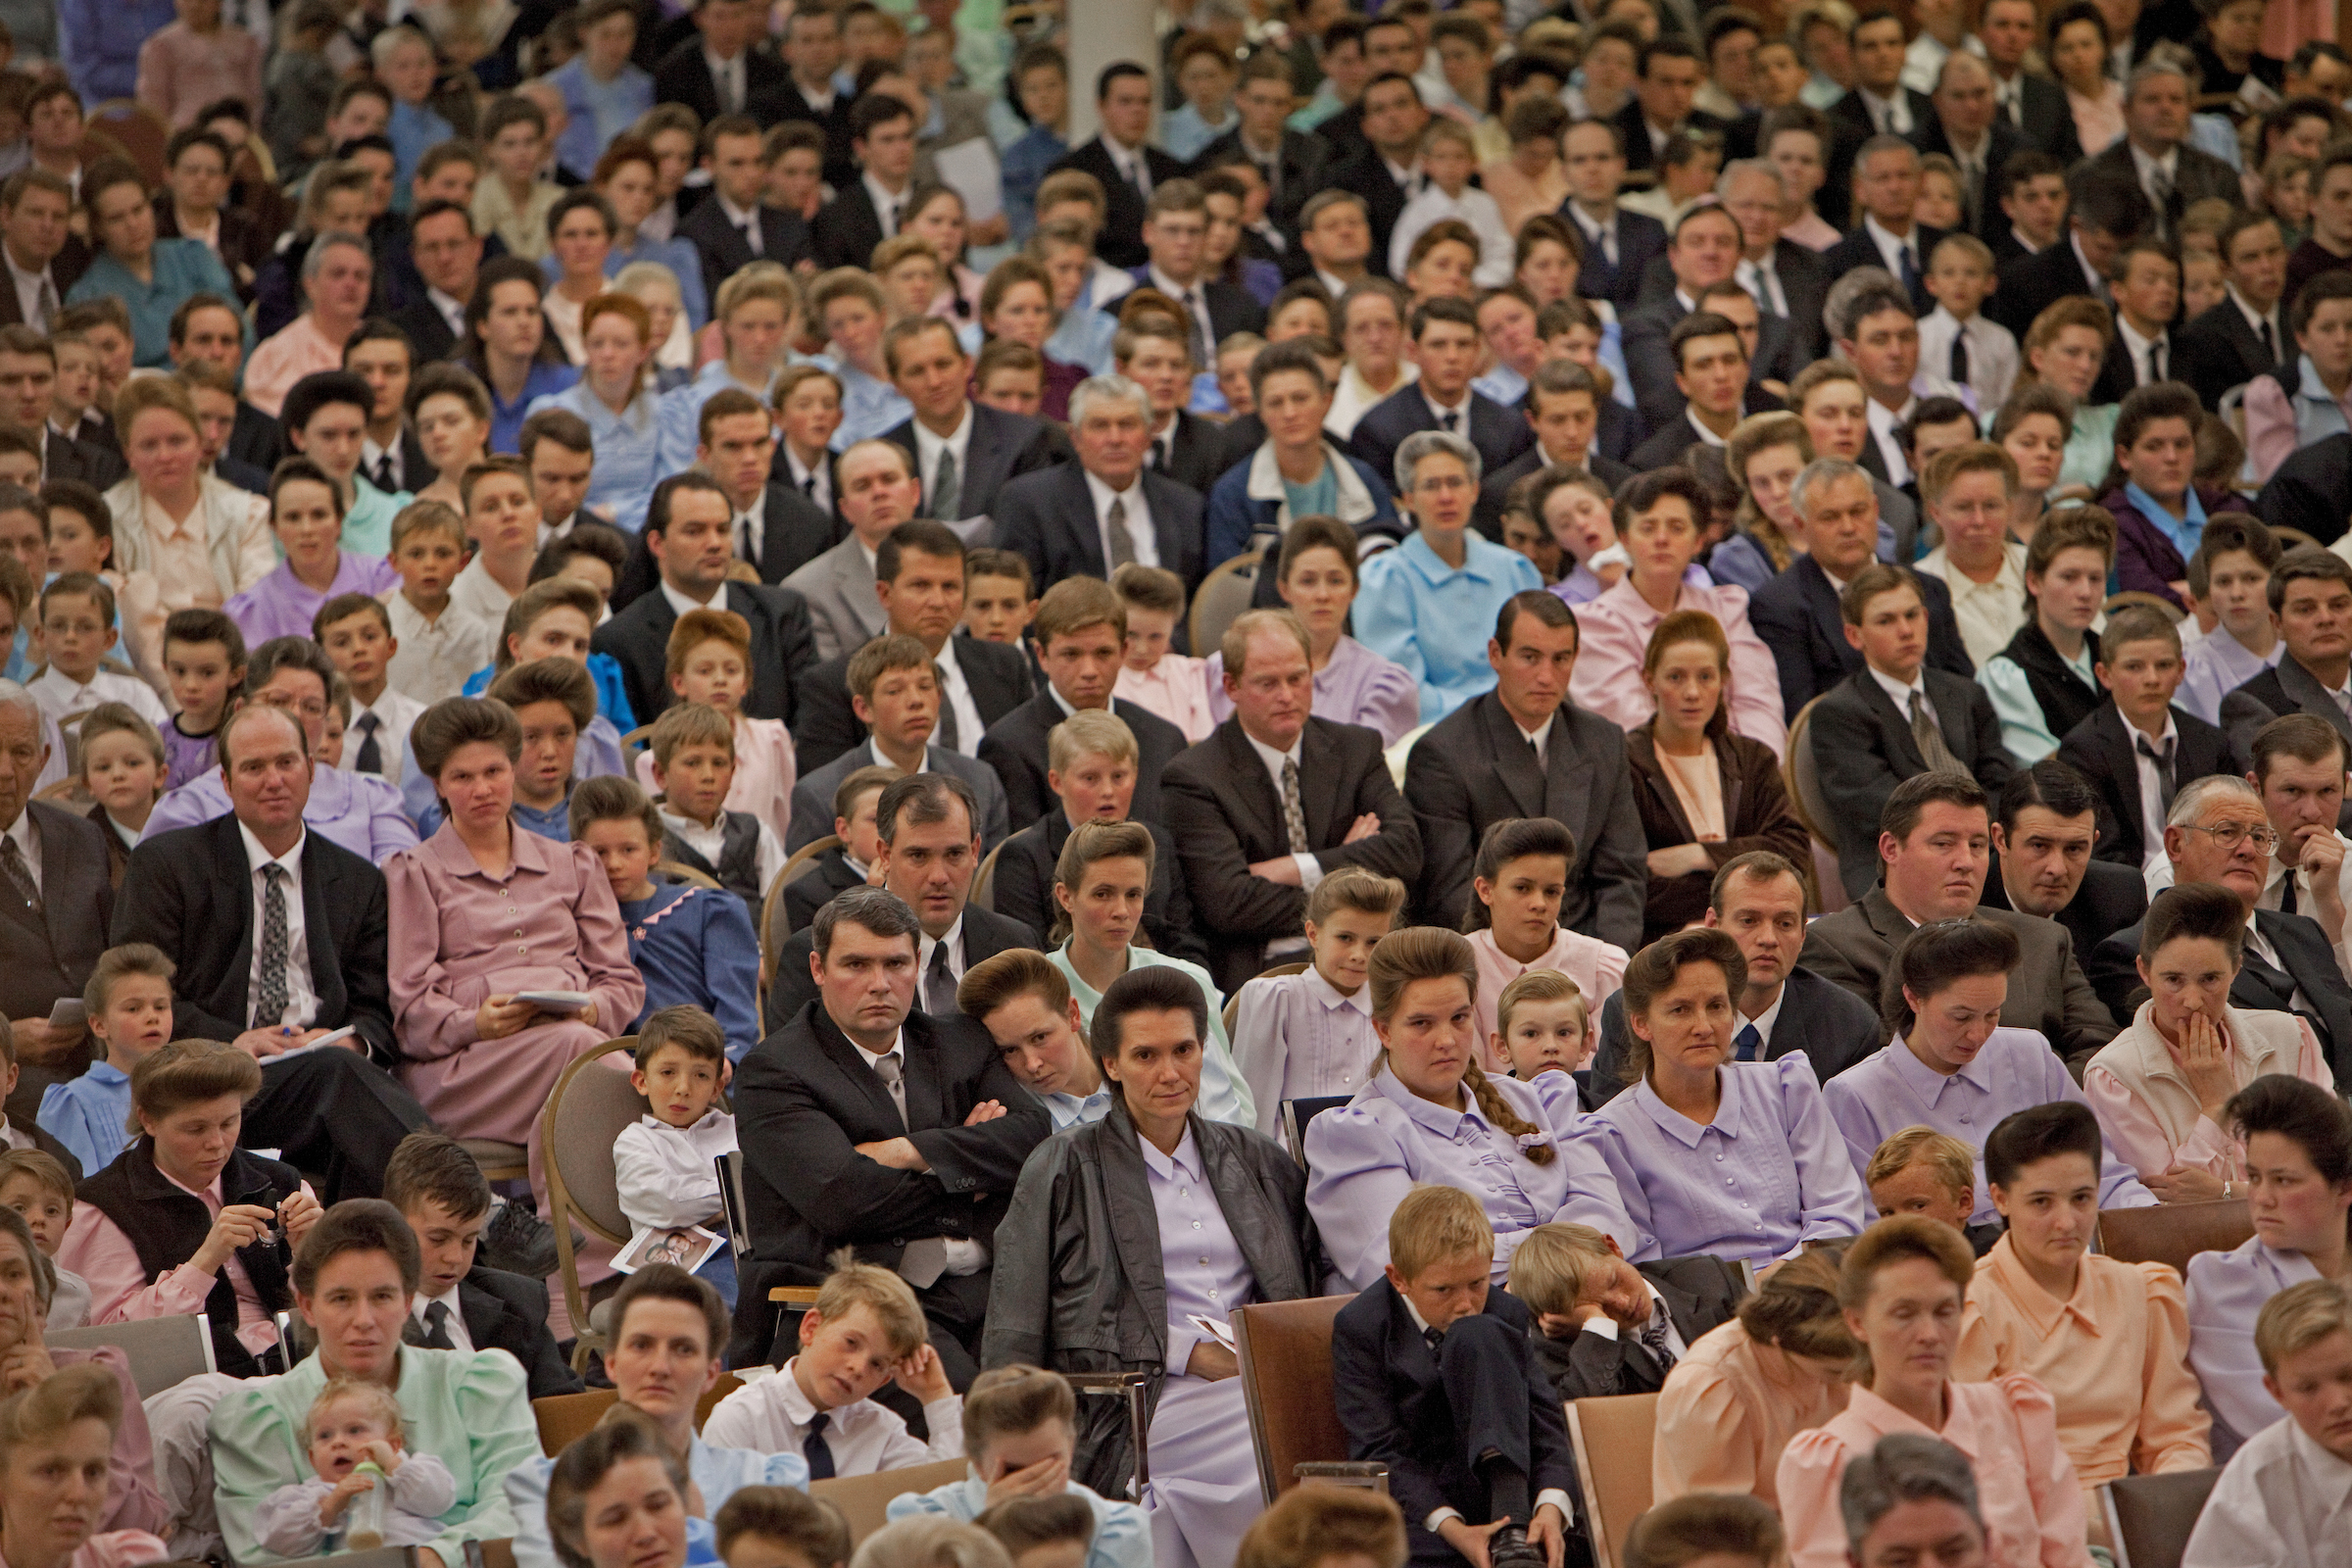 Thousands of FLDS members attend a funeral in Hilldale, Utah.